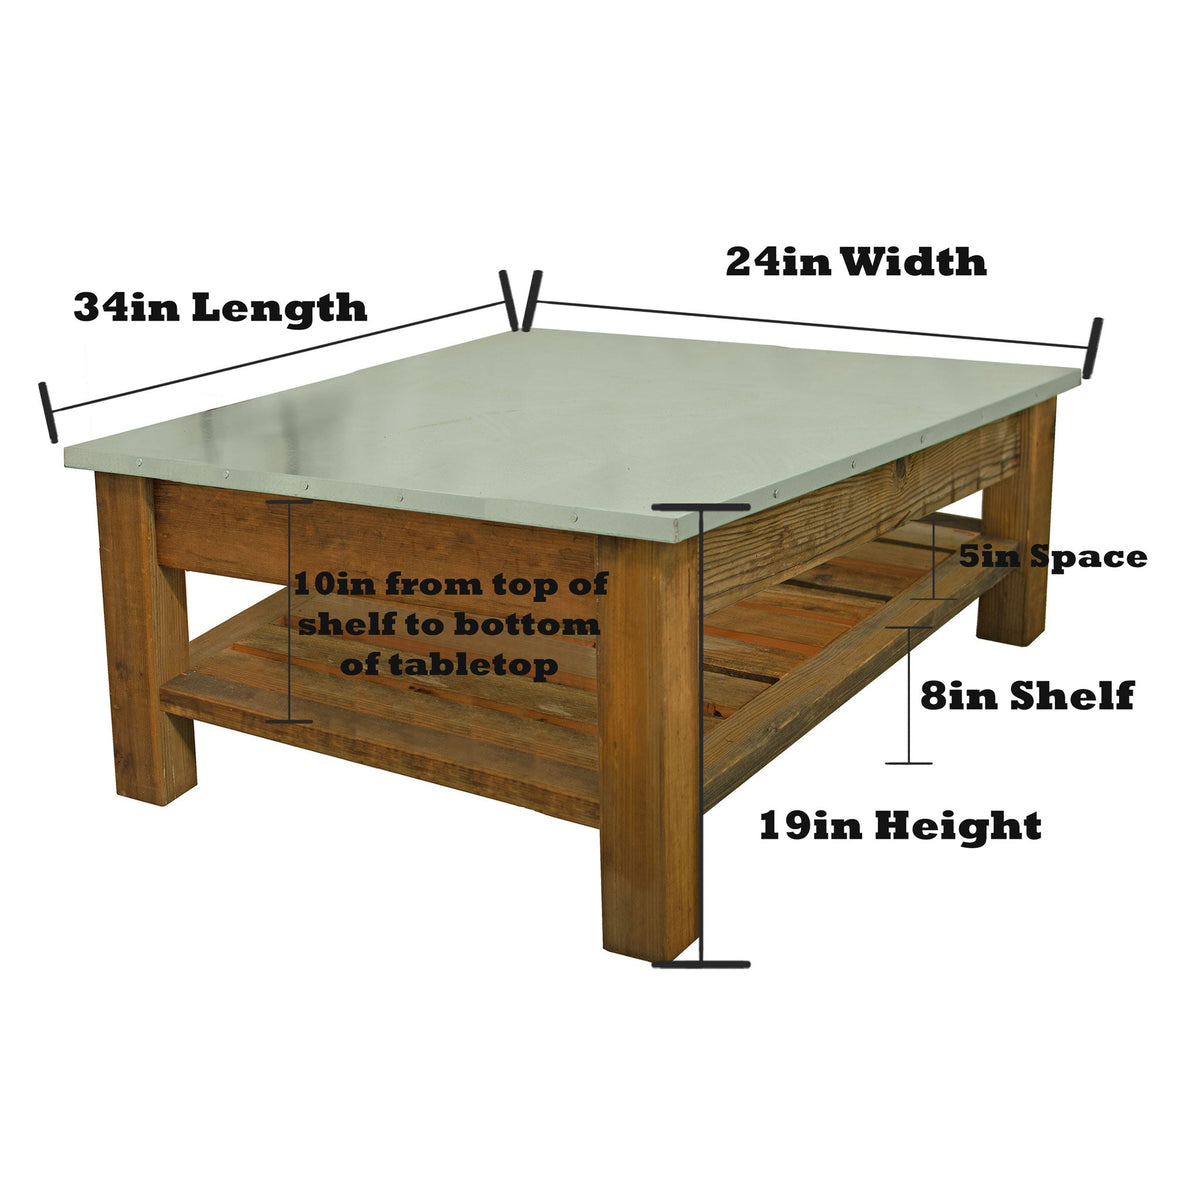 Dimensions of the Redwood Outdoor Patio Coffee Table